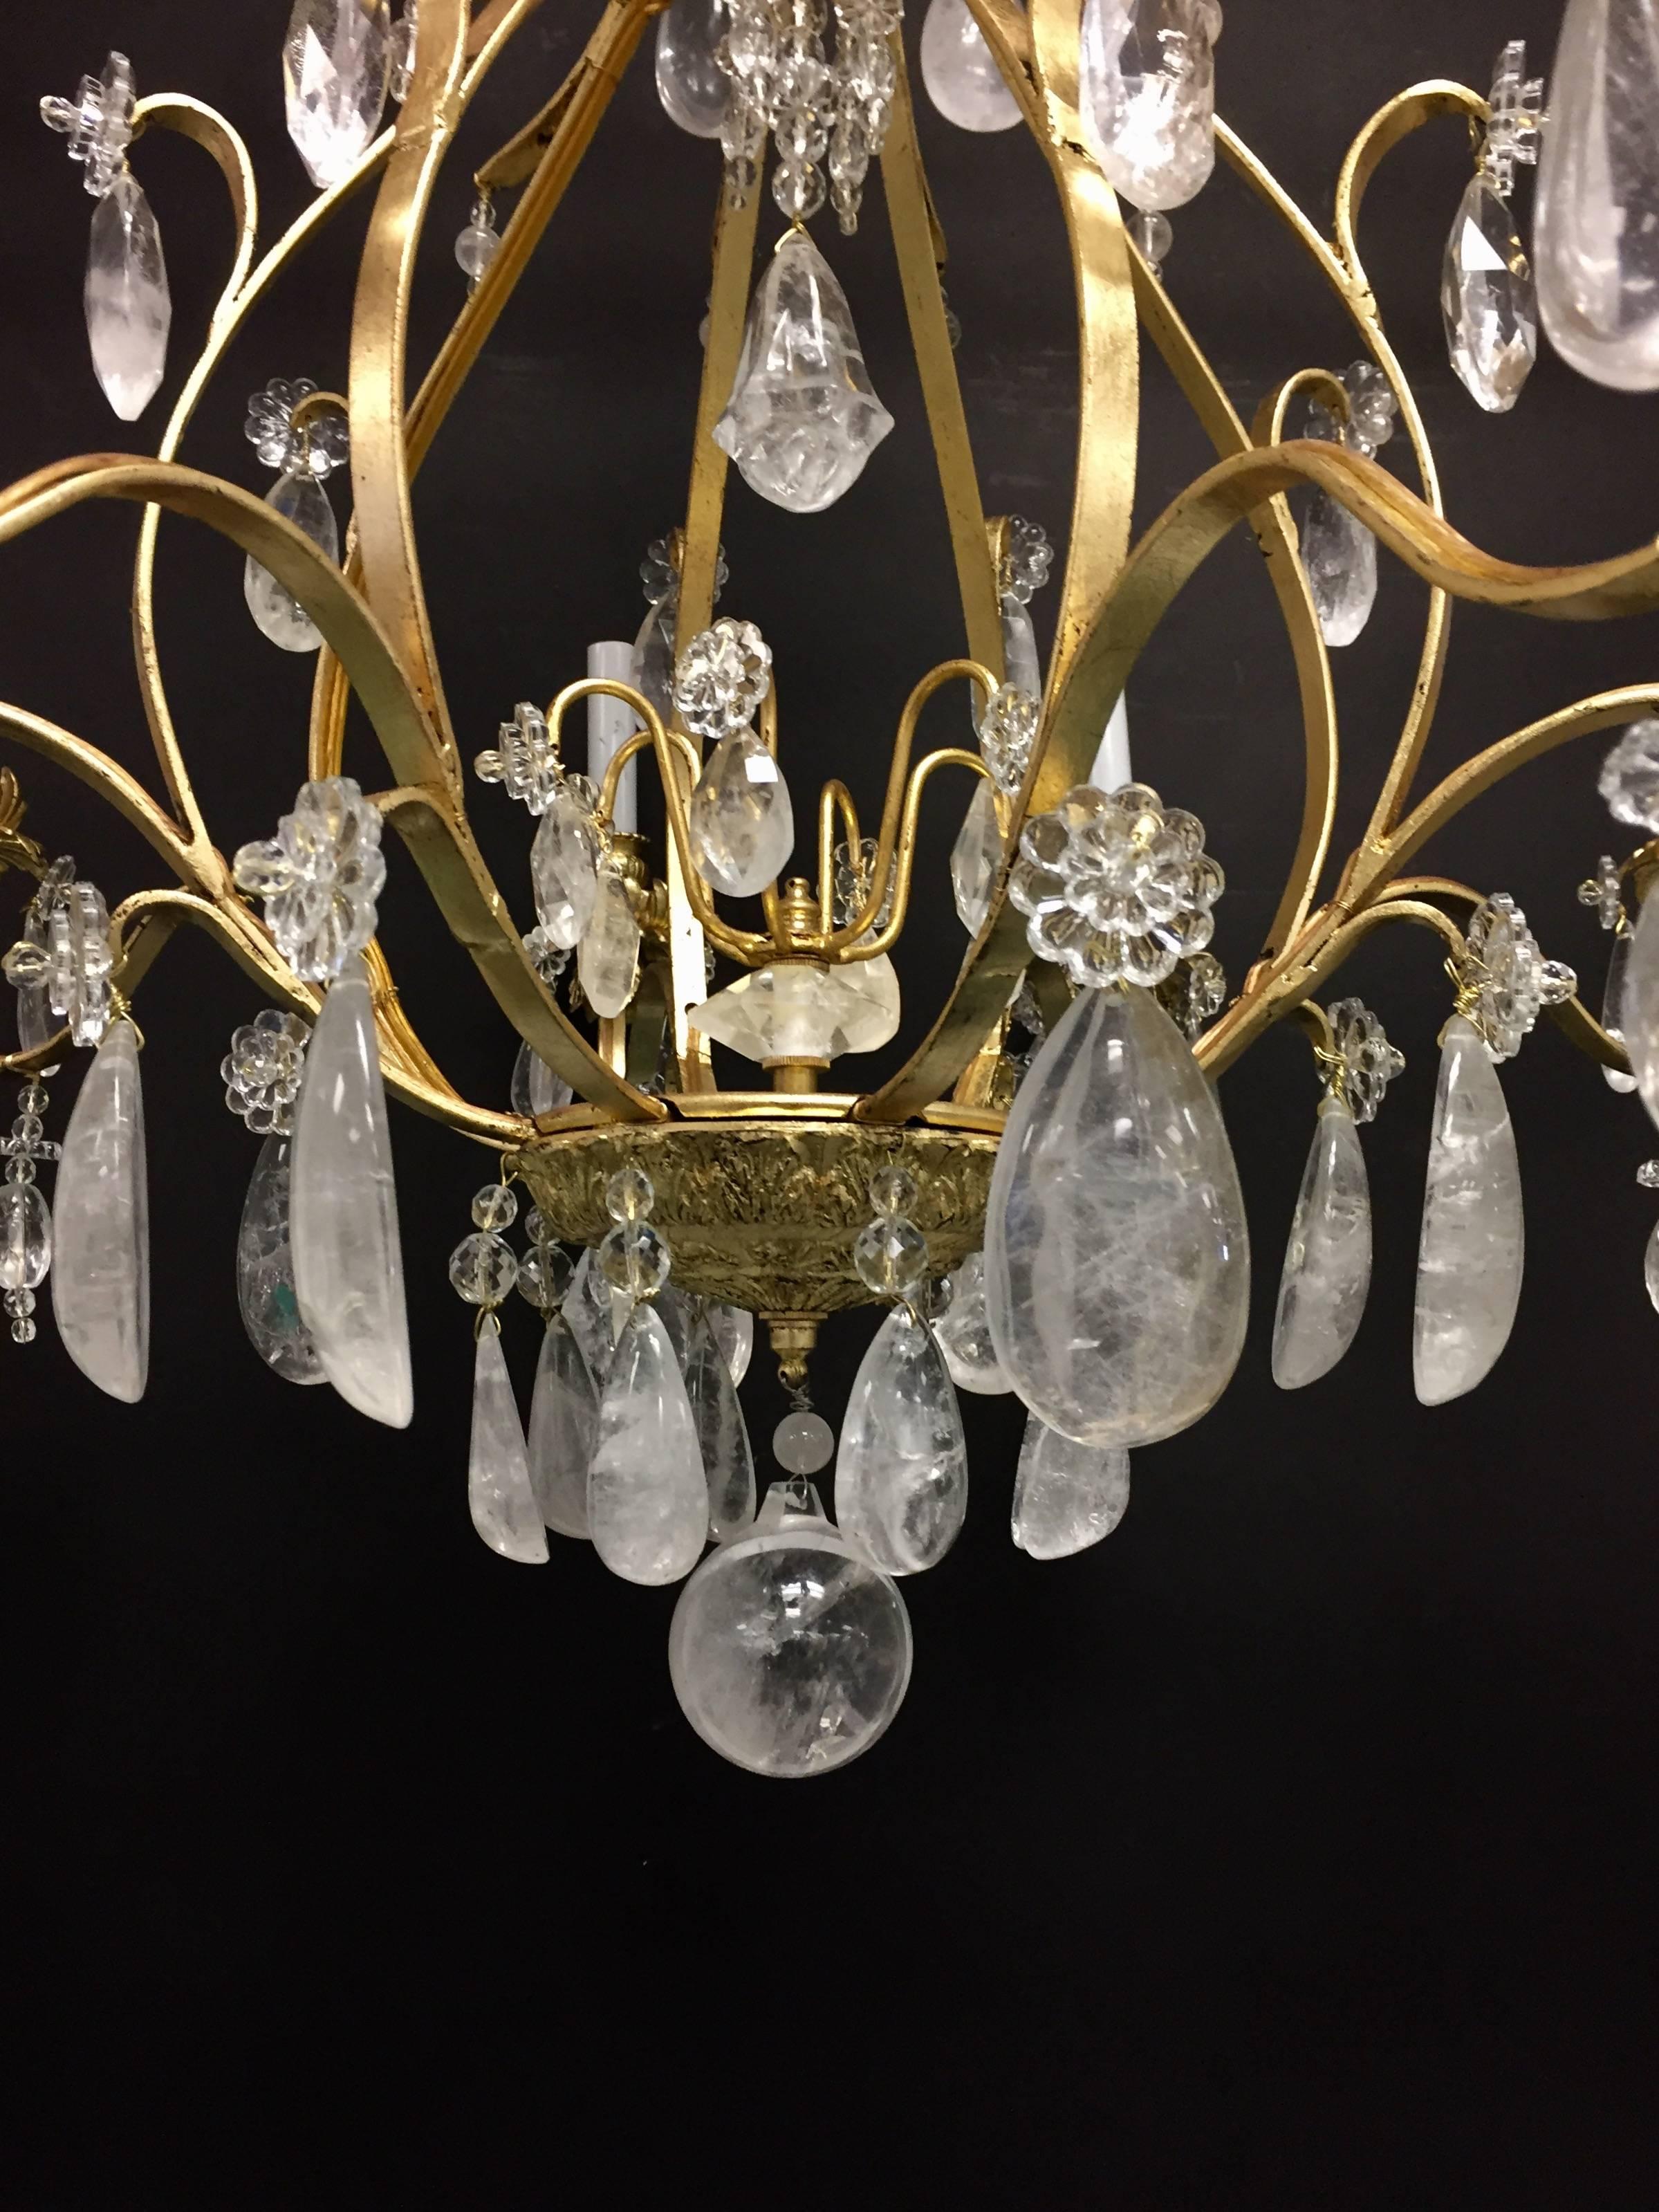 A wonderful French gold gilt iron Baguès style rock crystal eight-light chandelier
Completely redone and ready to enjoy.
Measures: 31